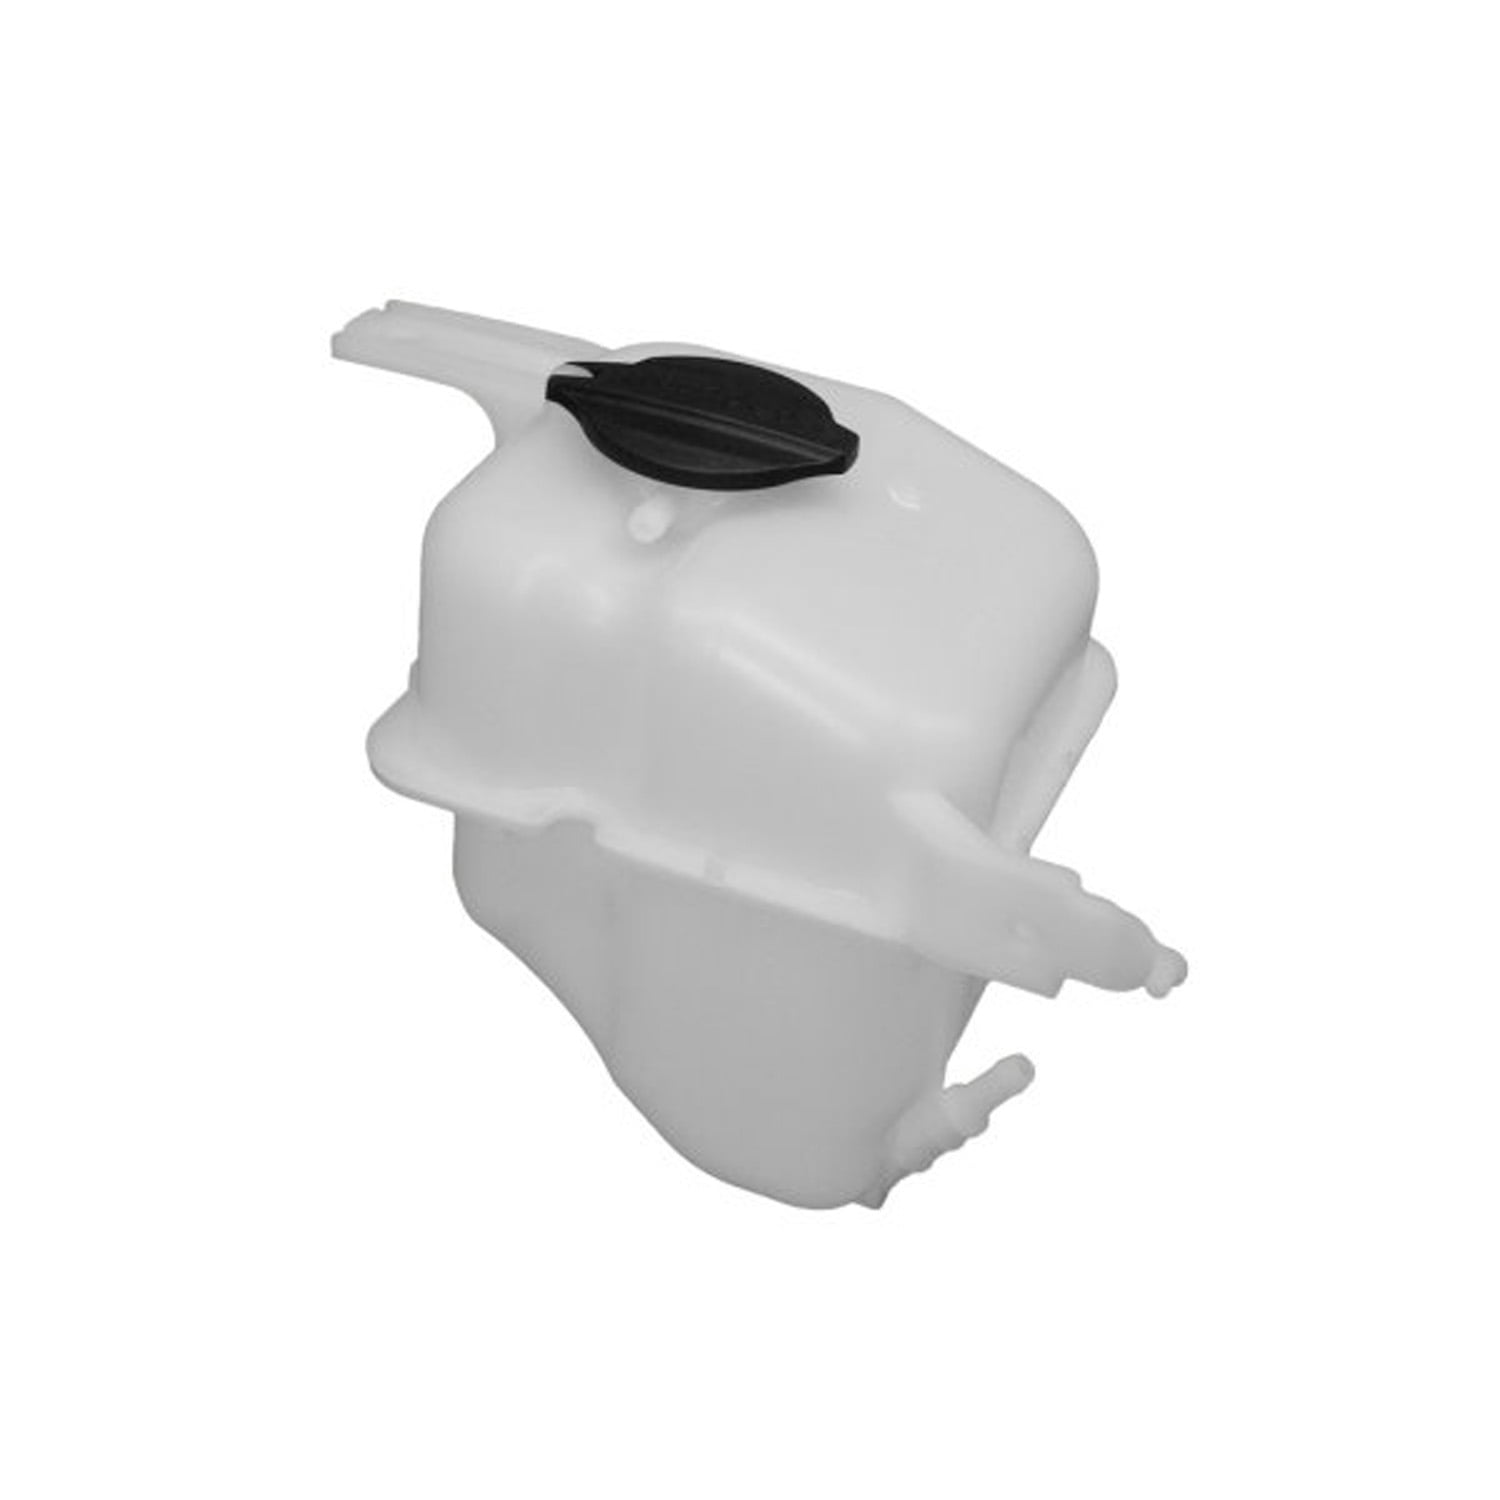 Engine Coolant Reservoir Expansion Tank with Cap Replacement for Ford Transit-150 250 350 350 HD 2015-2019